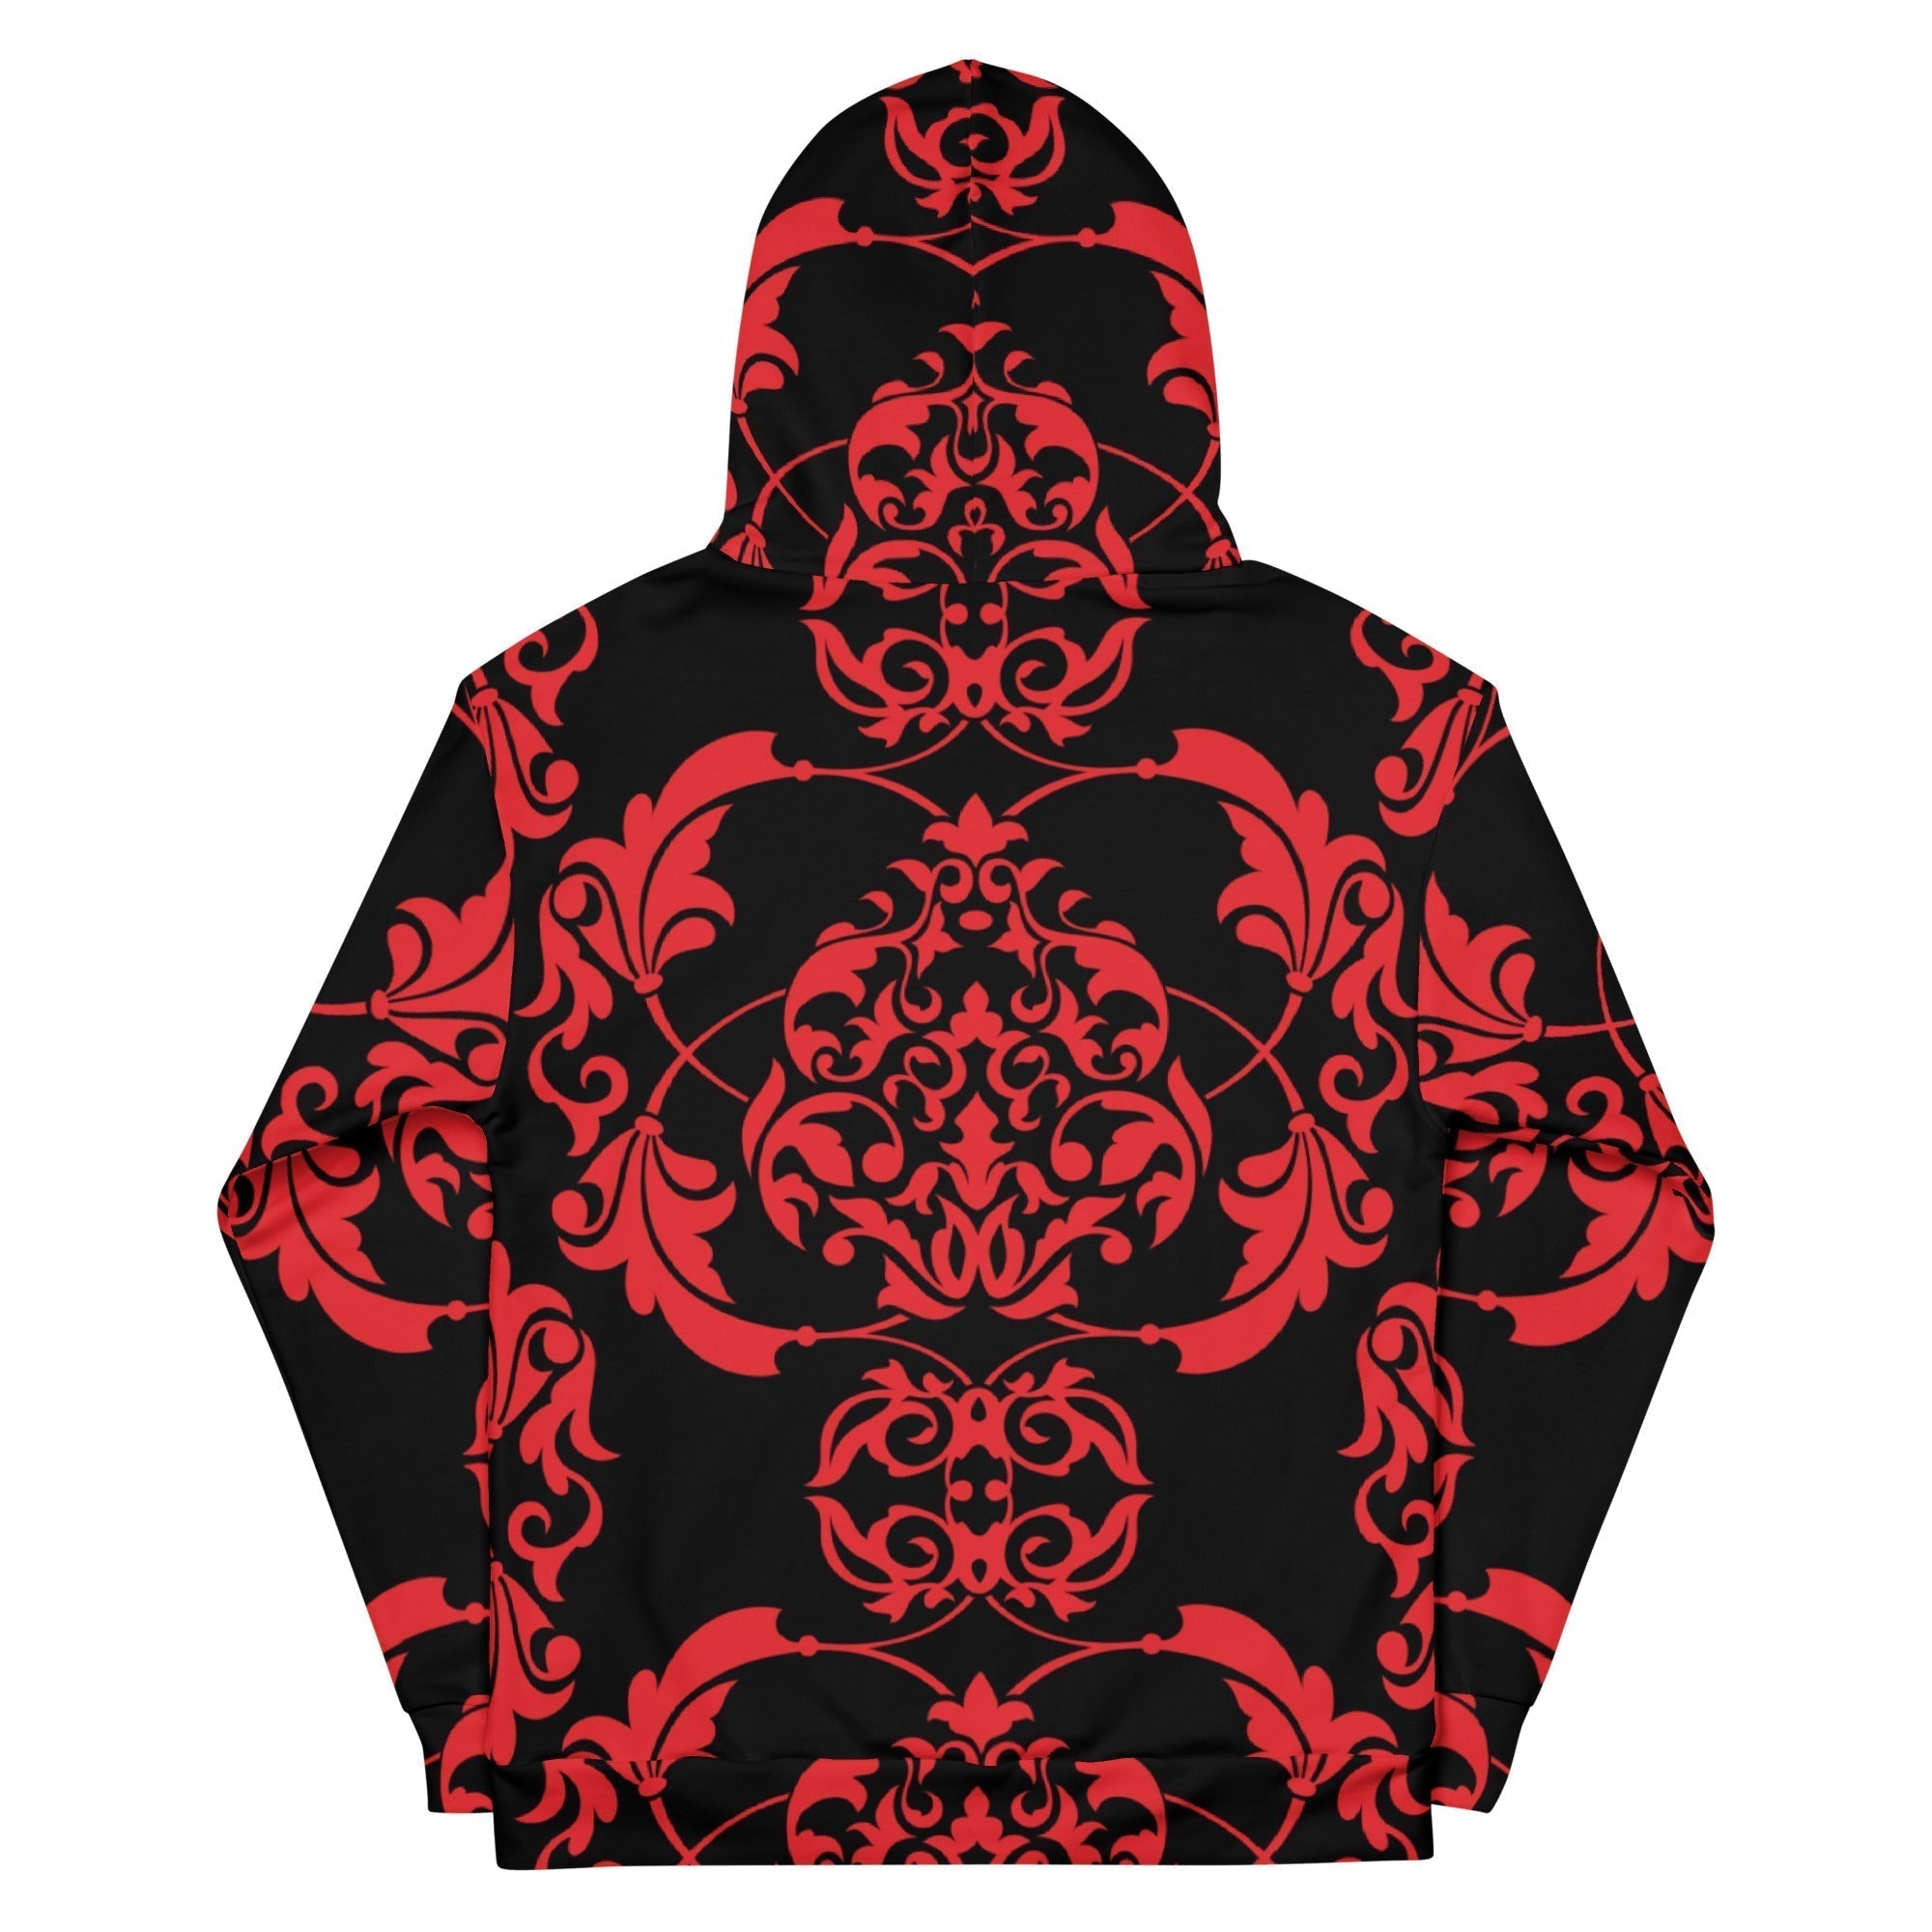 Unisex All-Over Print Hoodie - Red And Black Floral Euclidean European Pattern - GRAPHIC T-SHIRTS